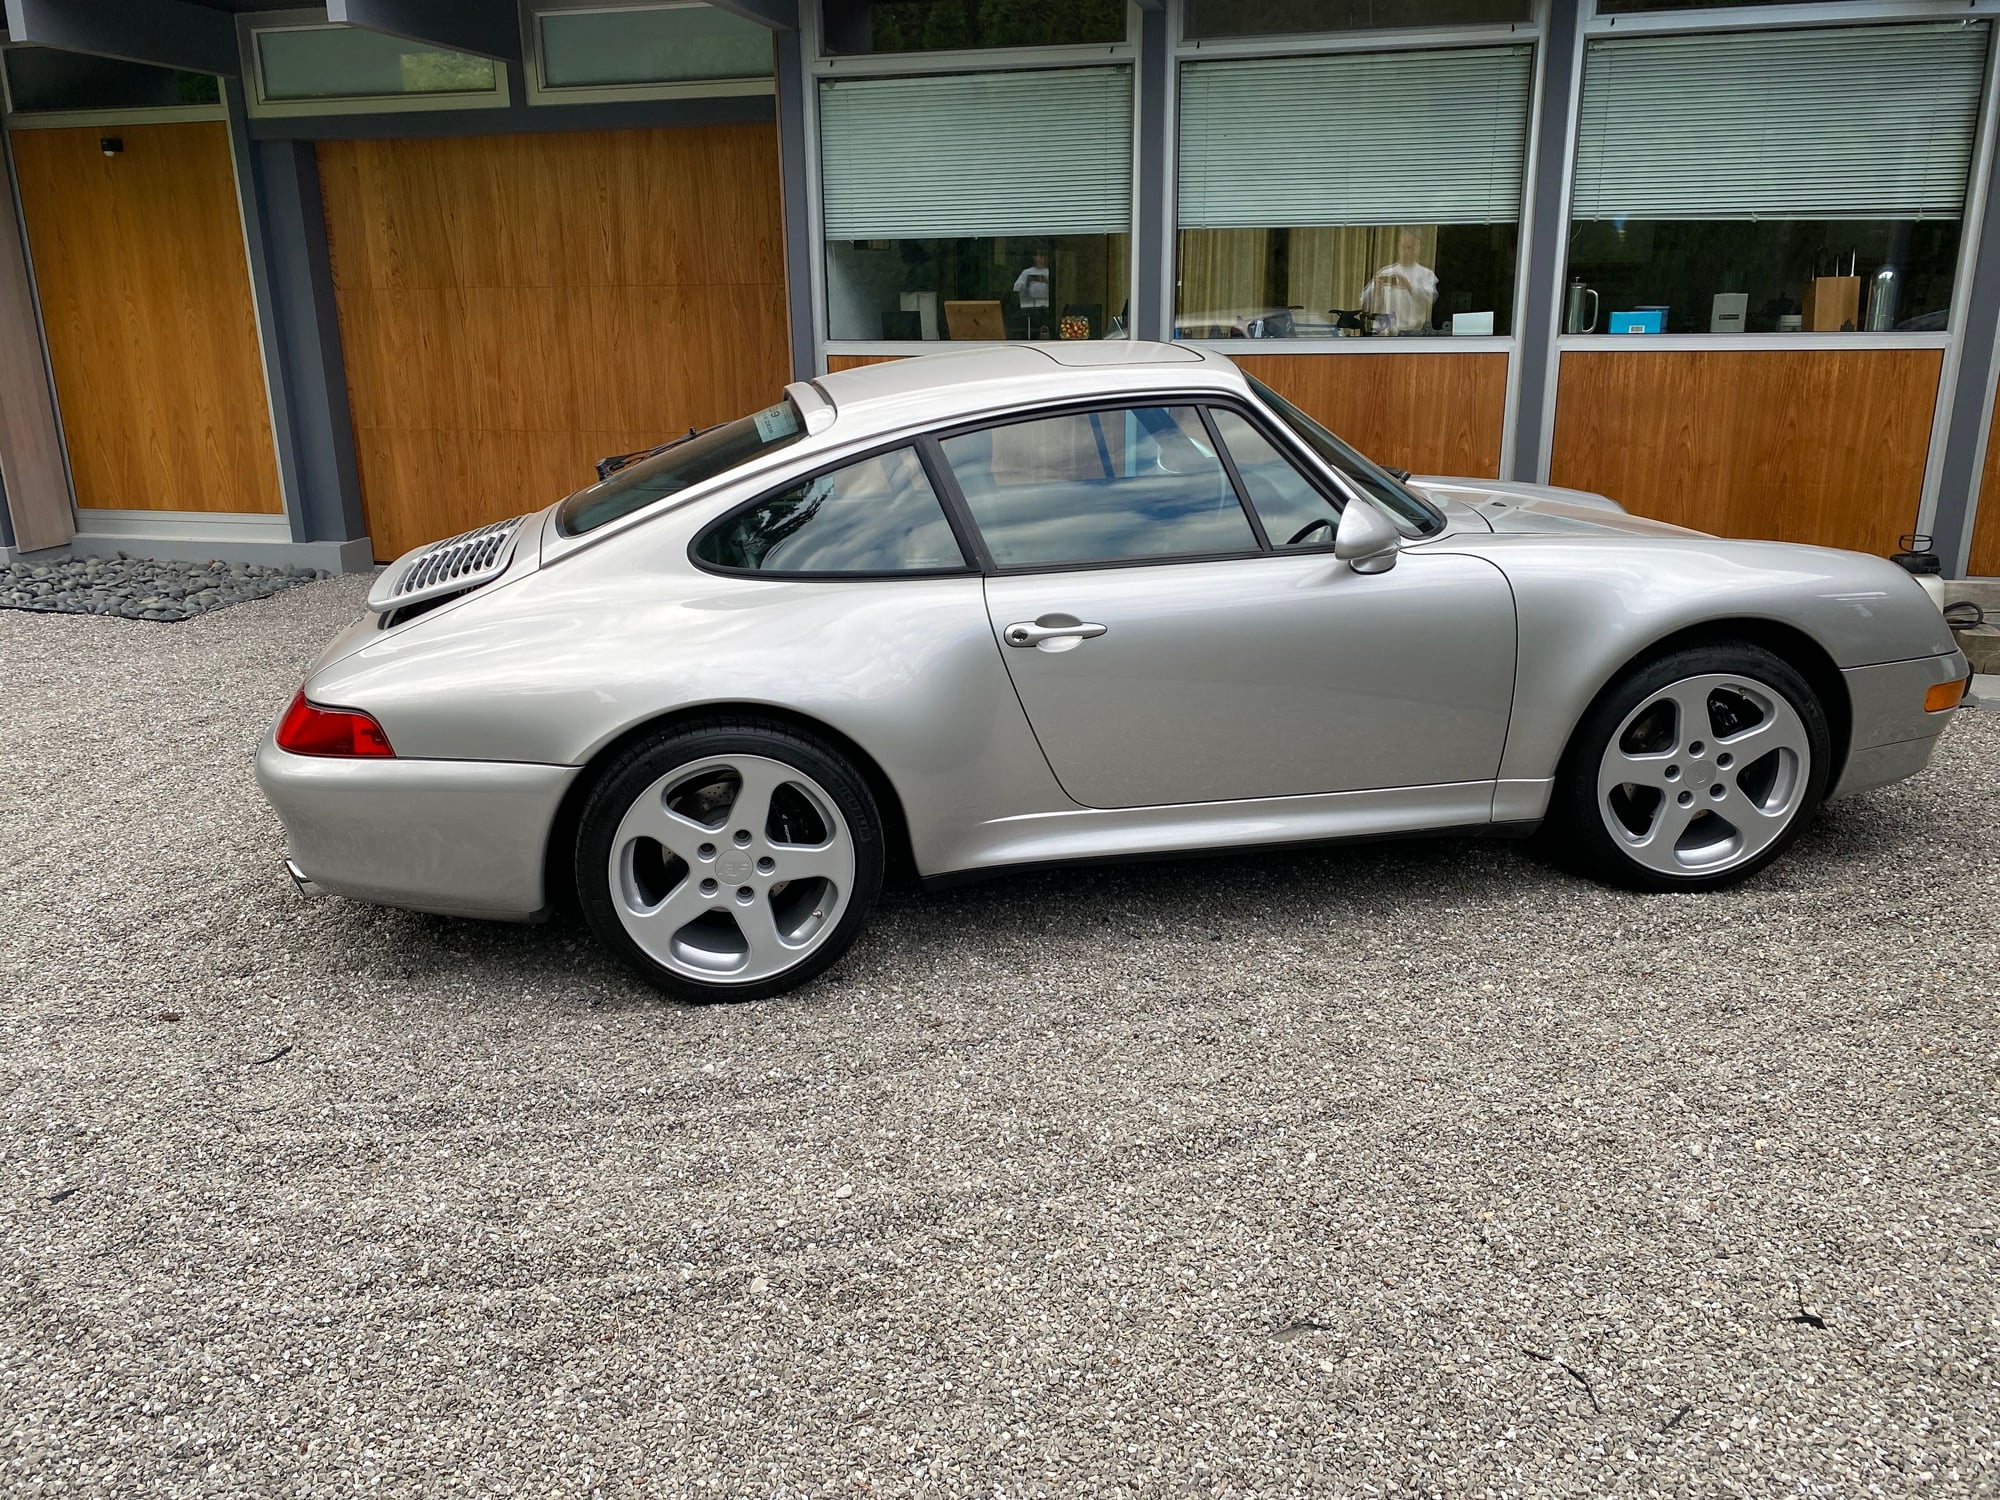 1997 Porsche 911 - Looking to trade or SELL my mint '97 993s for '18 GT3 Touring... - Used - VIN WP0AA2992VS322682 - 6 cyl - 2WD - Manual - Coupe - Silver - Ann Arbor, MI 48103, United States